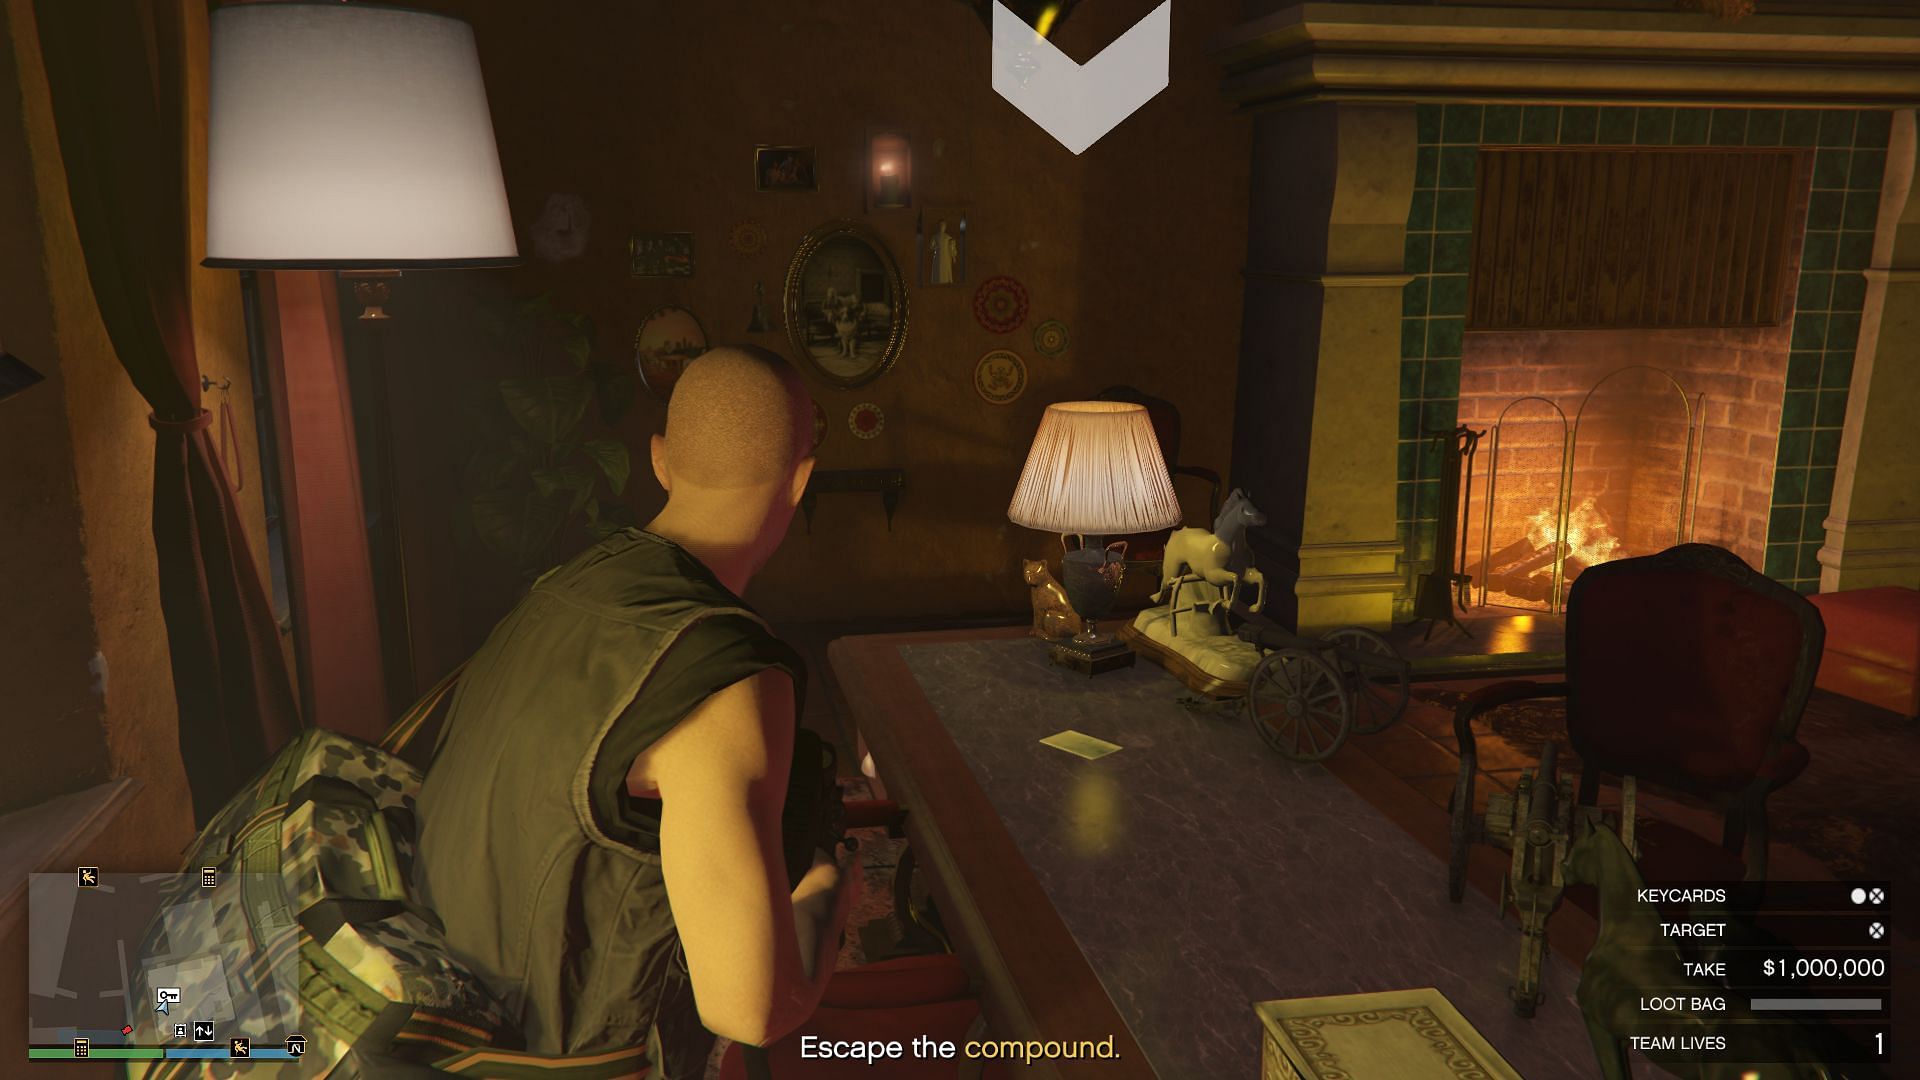 His safe is located behind those pictures (Image via Rockstar Games)